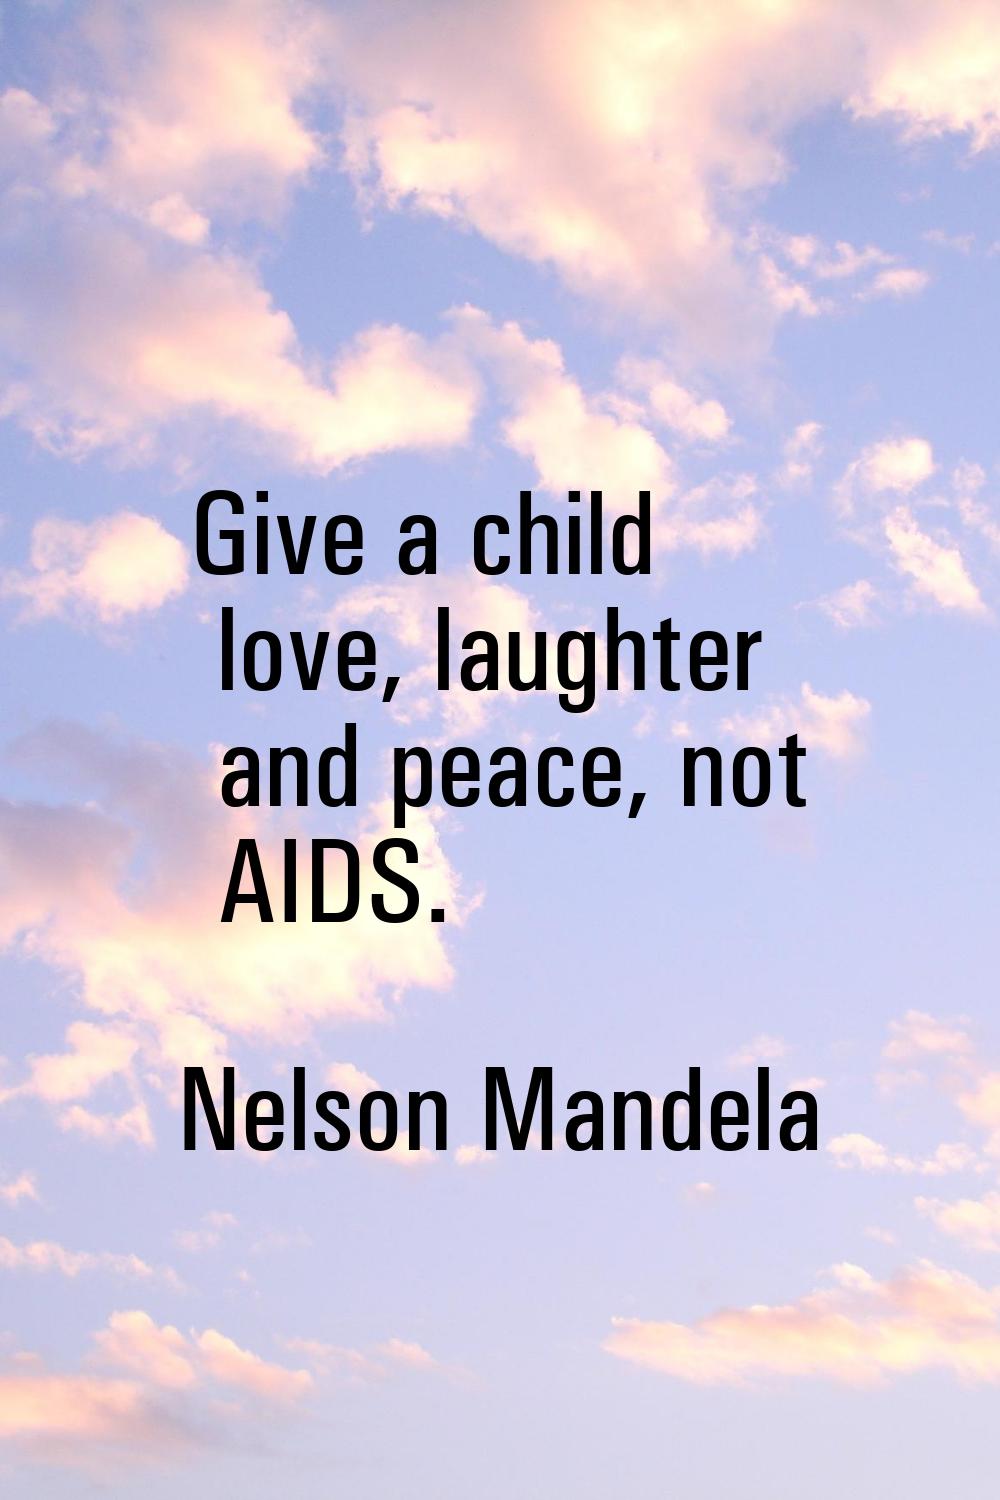 Give a child love, laughter and peace, not AIDS.